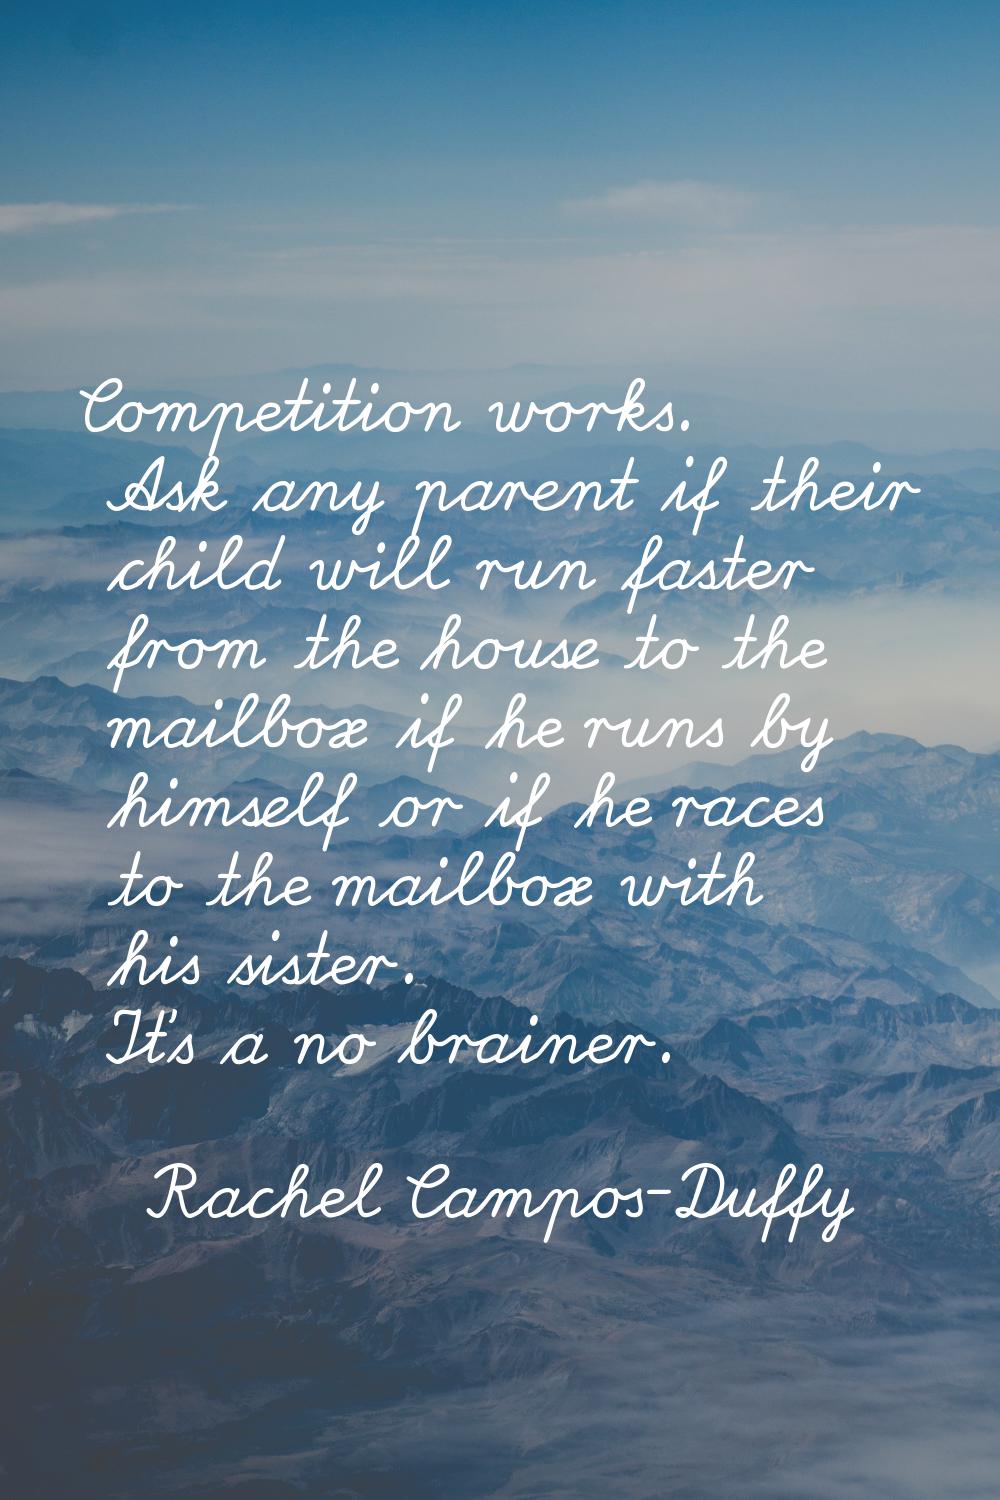 Competition works. Ask any parent if their child will run faster from the house to the mailbox if h